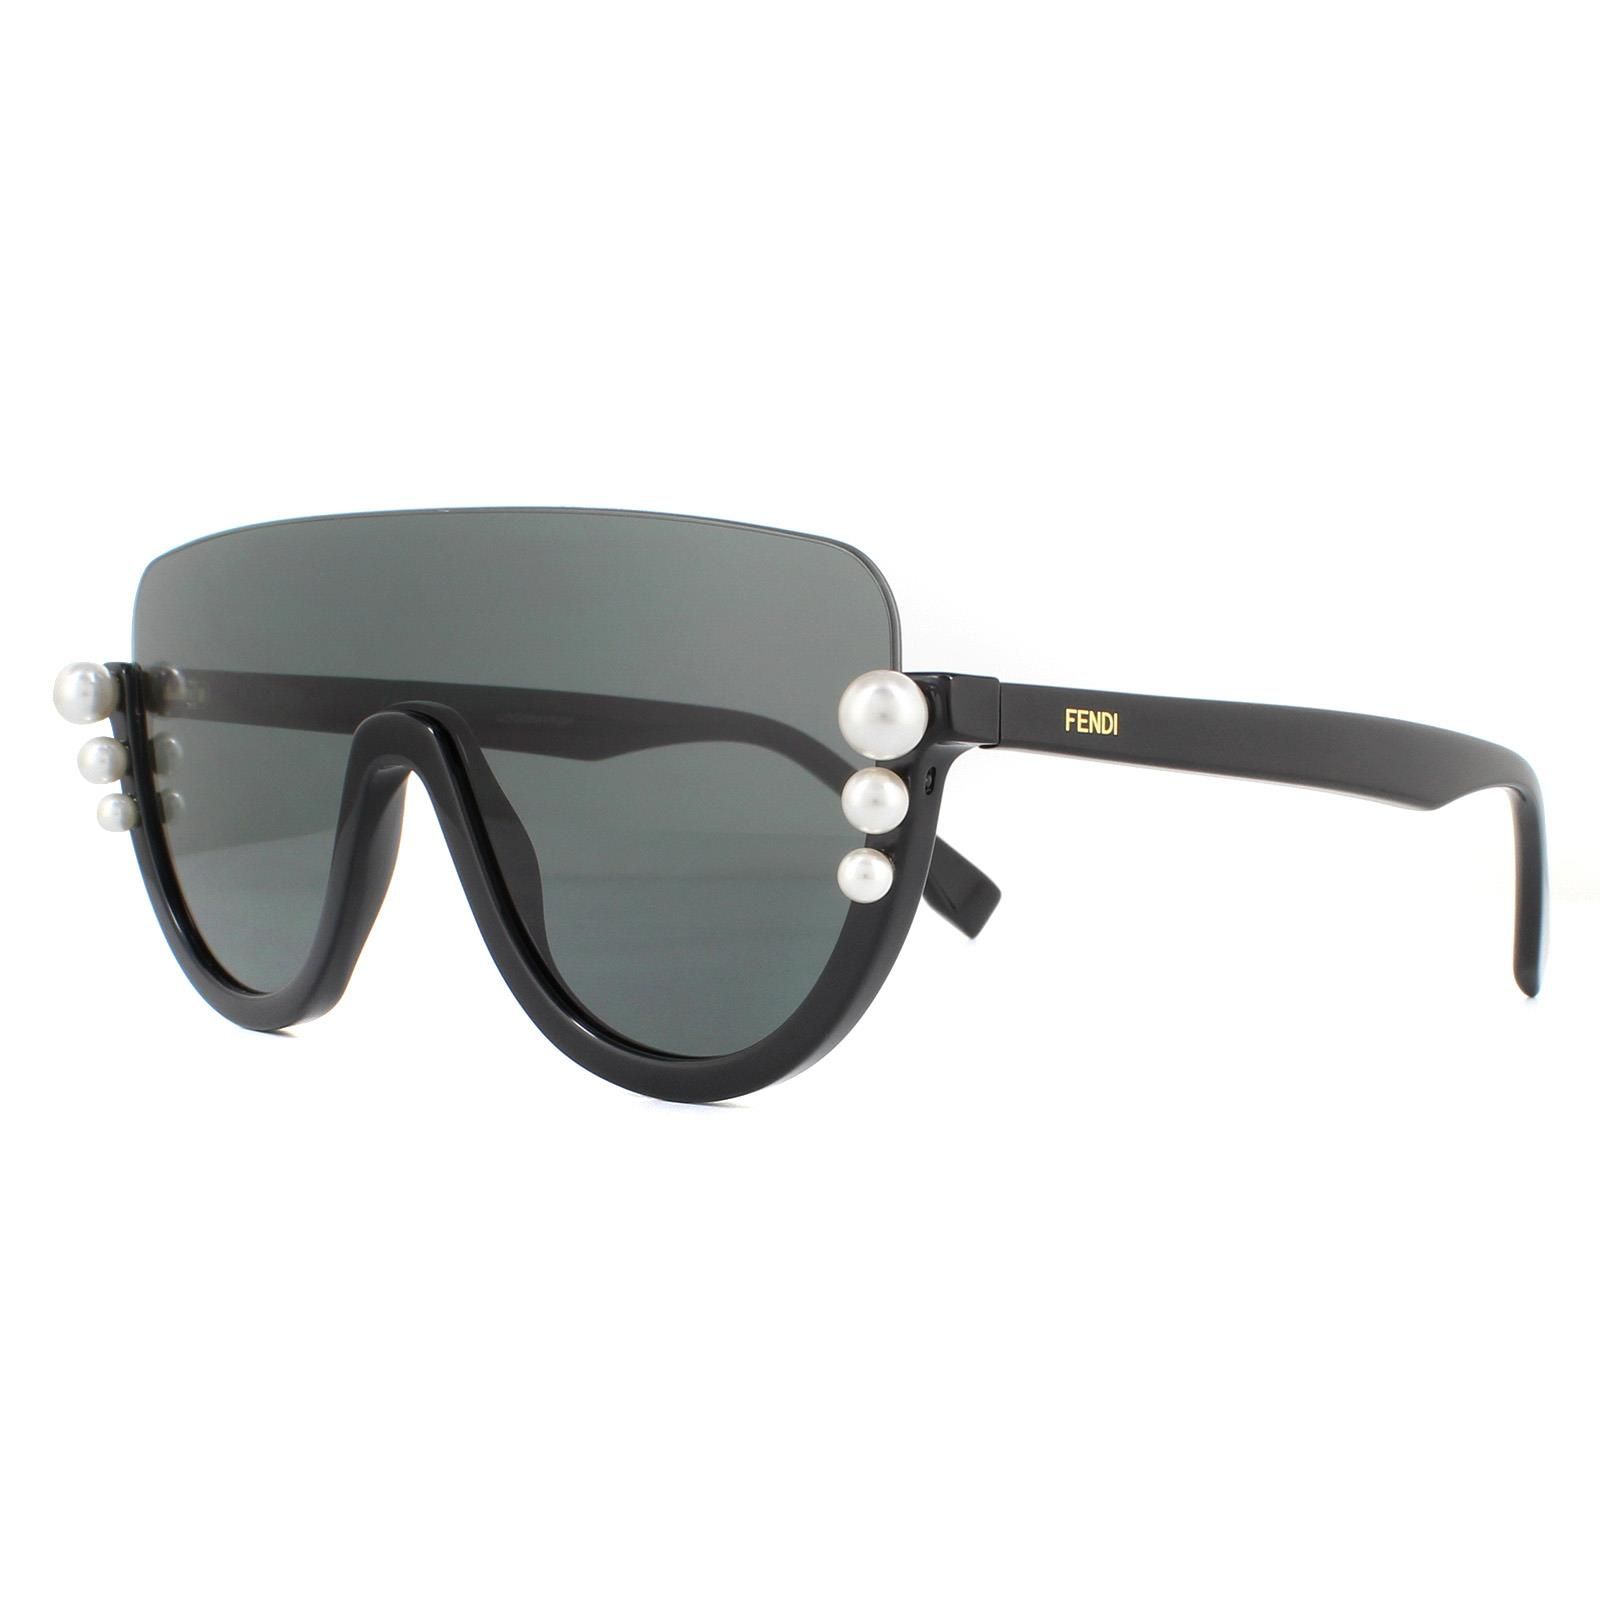 Fendi Sunglasses FF0296/S 807 IR Black Grey are a truly unique style with an upside down style design with the frame at the bottom and rimless at the top. 3 decreasing size pearls feature at the sides for a luxury embellishment.